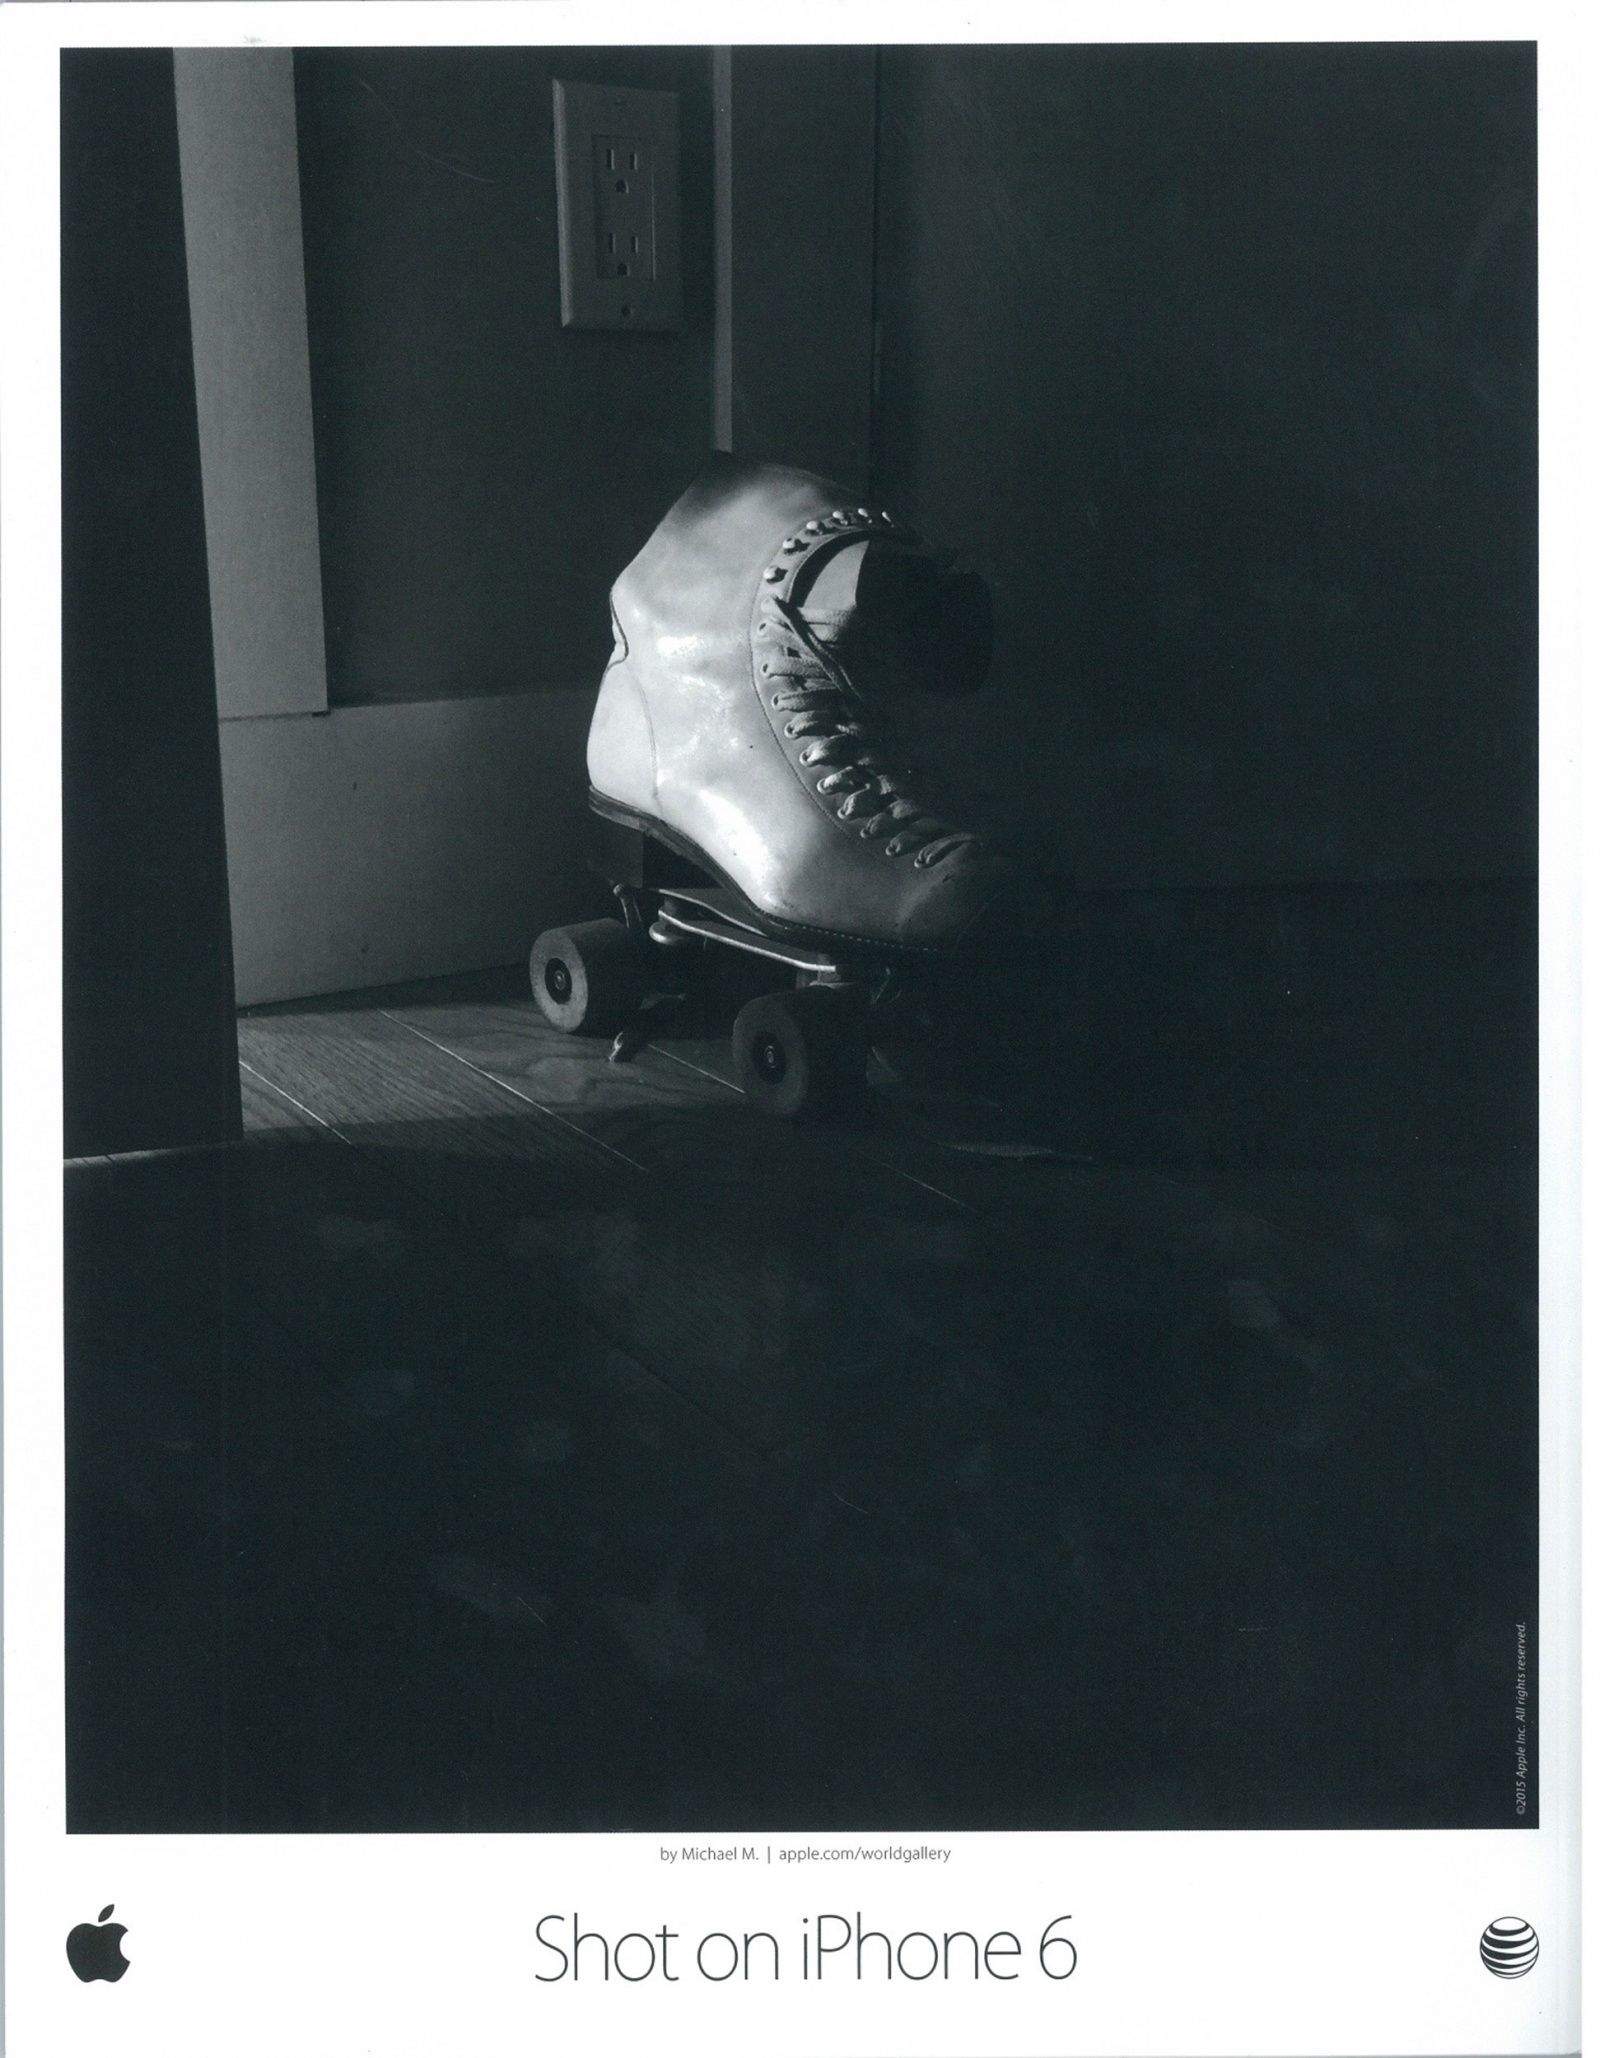 This vintage roller skate was one of three photos by photographer Michael Mainenti that were chosen by Apple for the 